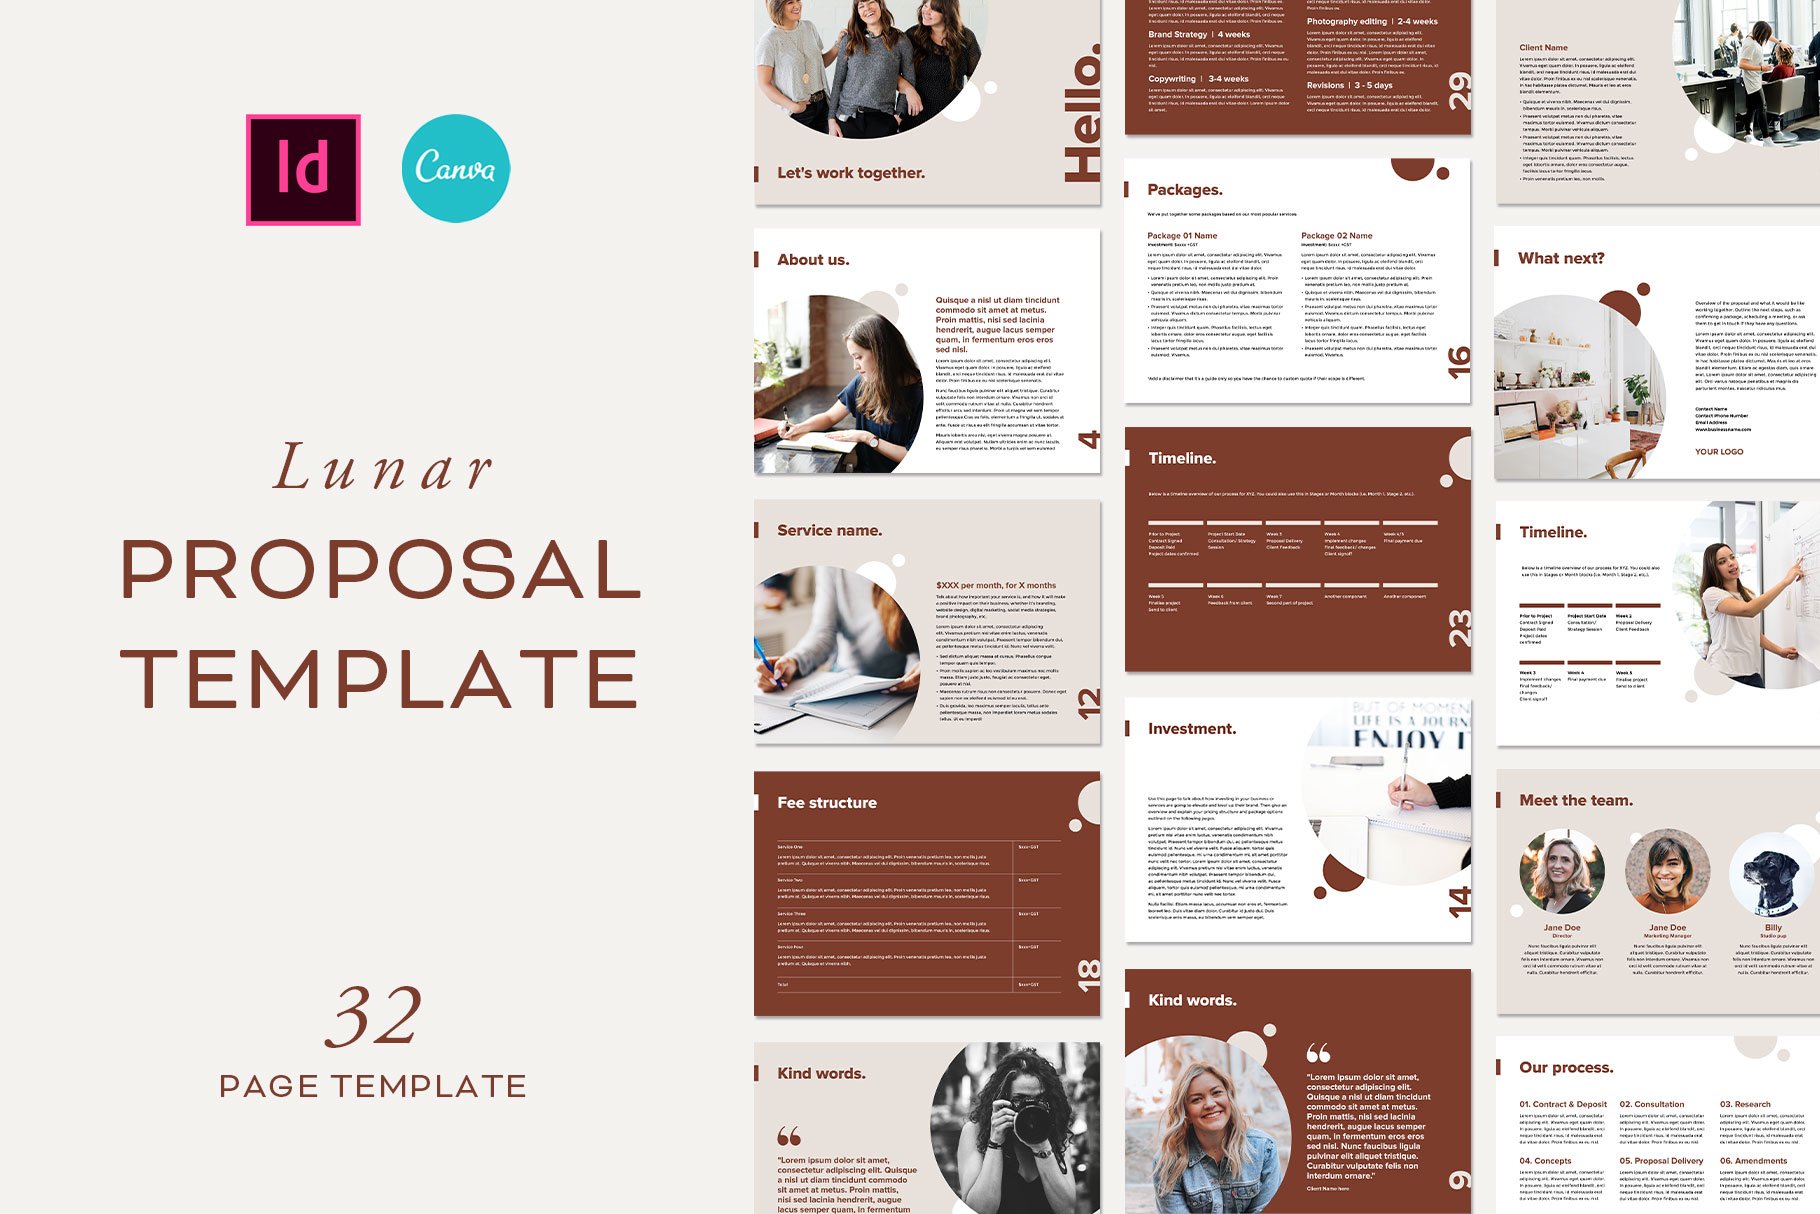 Proposal Template - Canva & InDesign cover image.